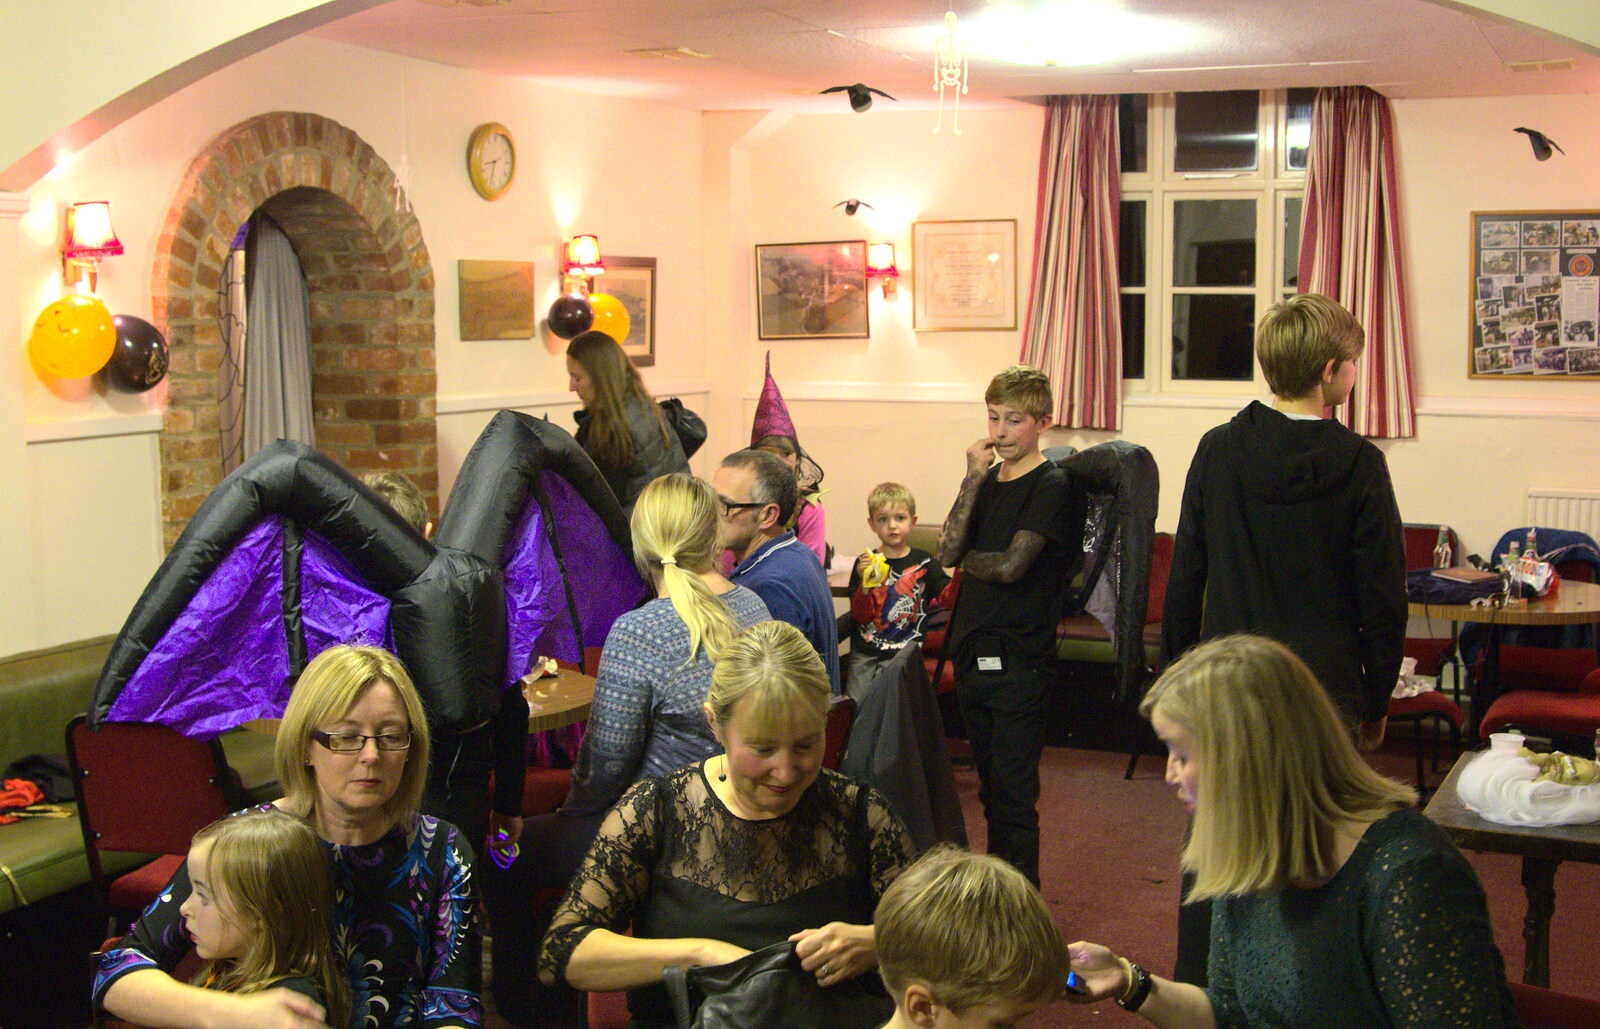 The bar area from A Halloween Party at the Village Hall, Brome, Suffolk - 31st October 2014